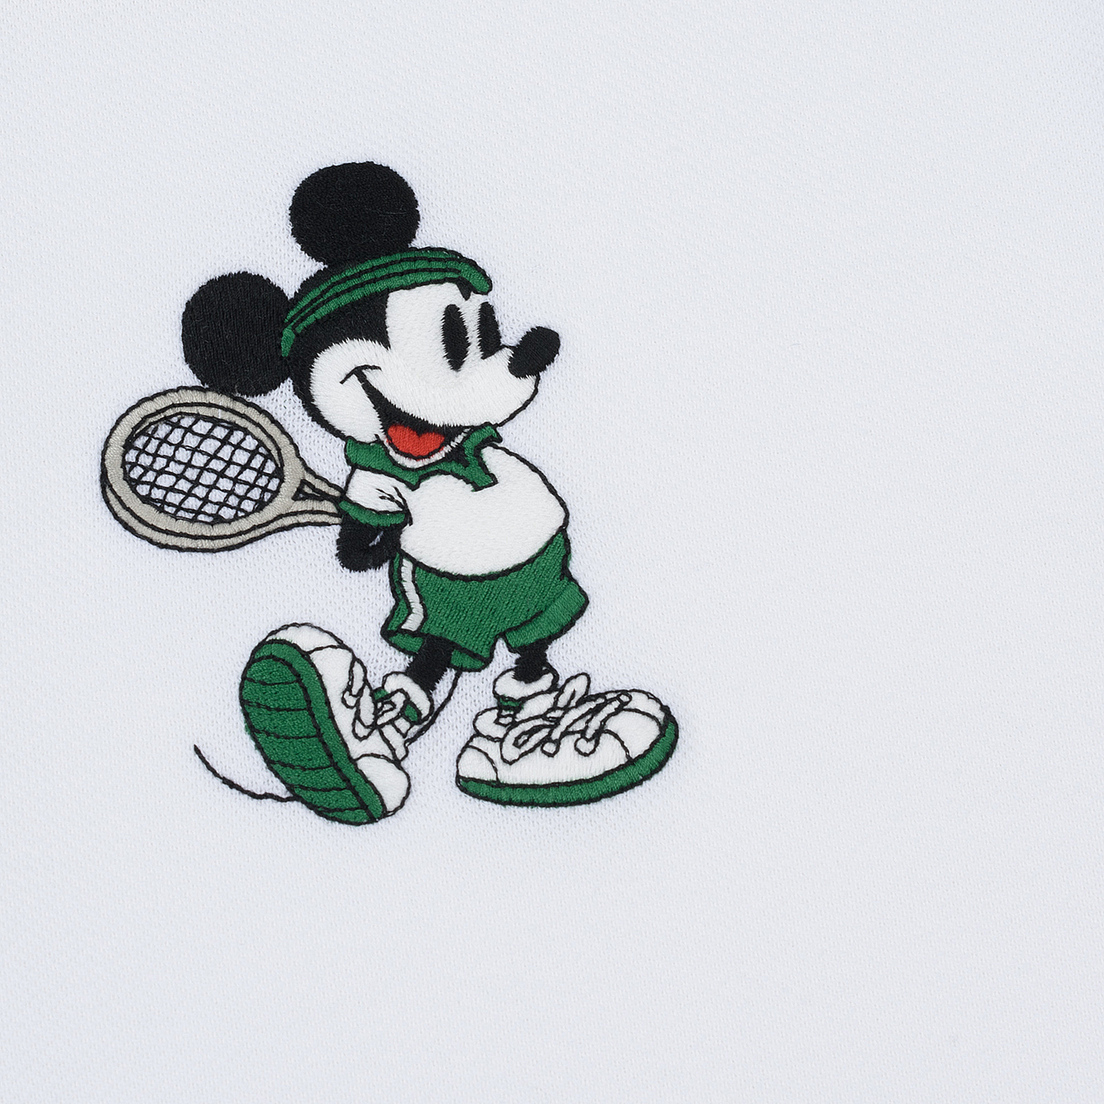 Lacoste Мужское поло x Disney Embroidered Mickey Mouse